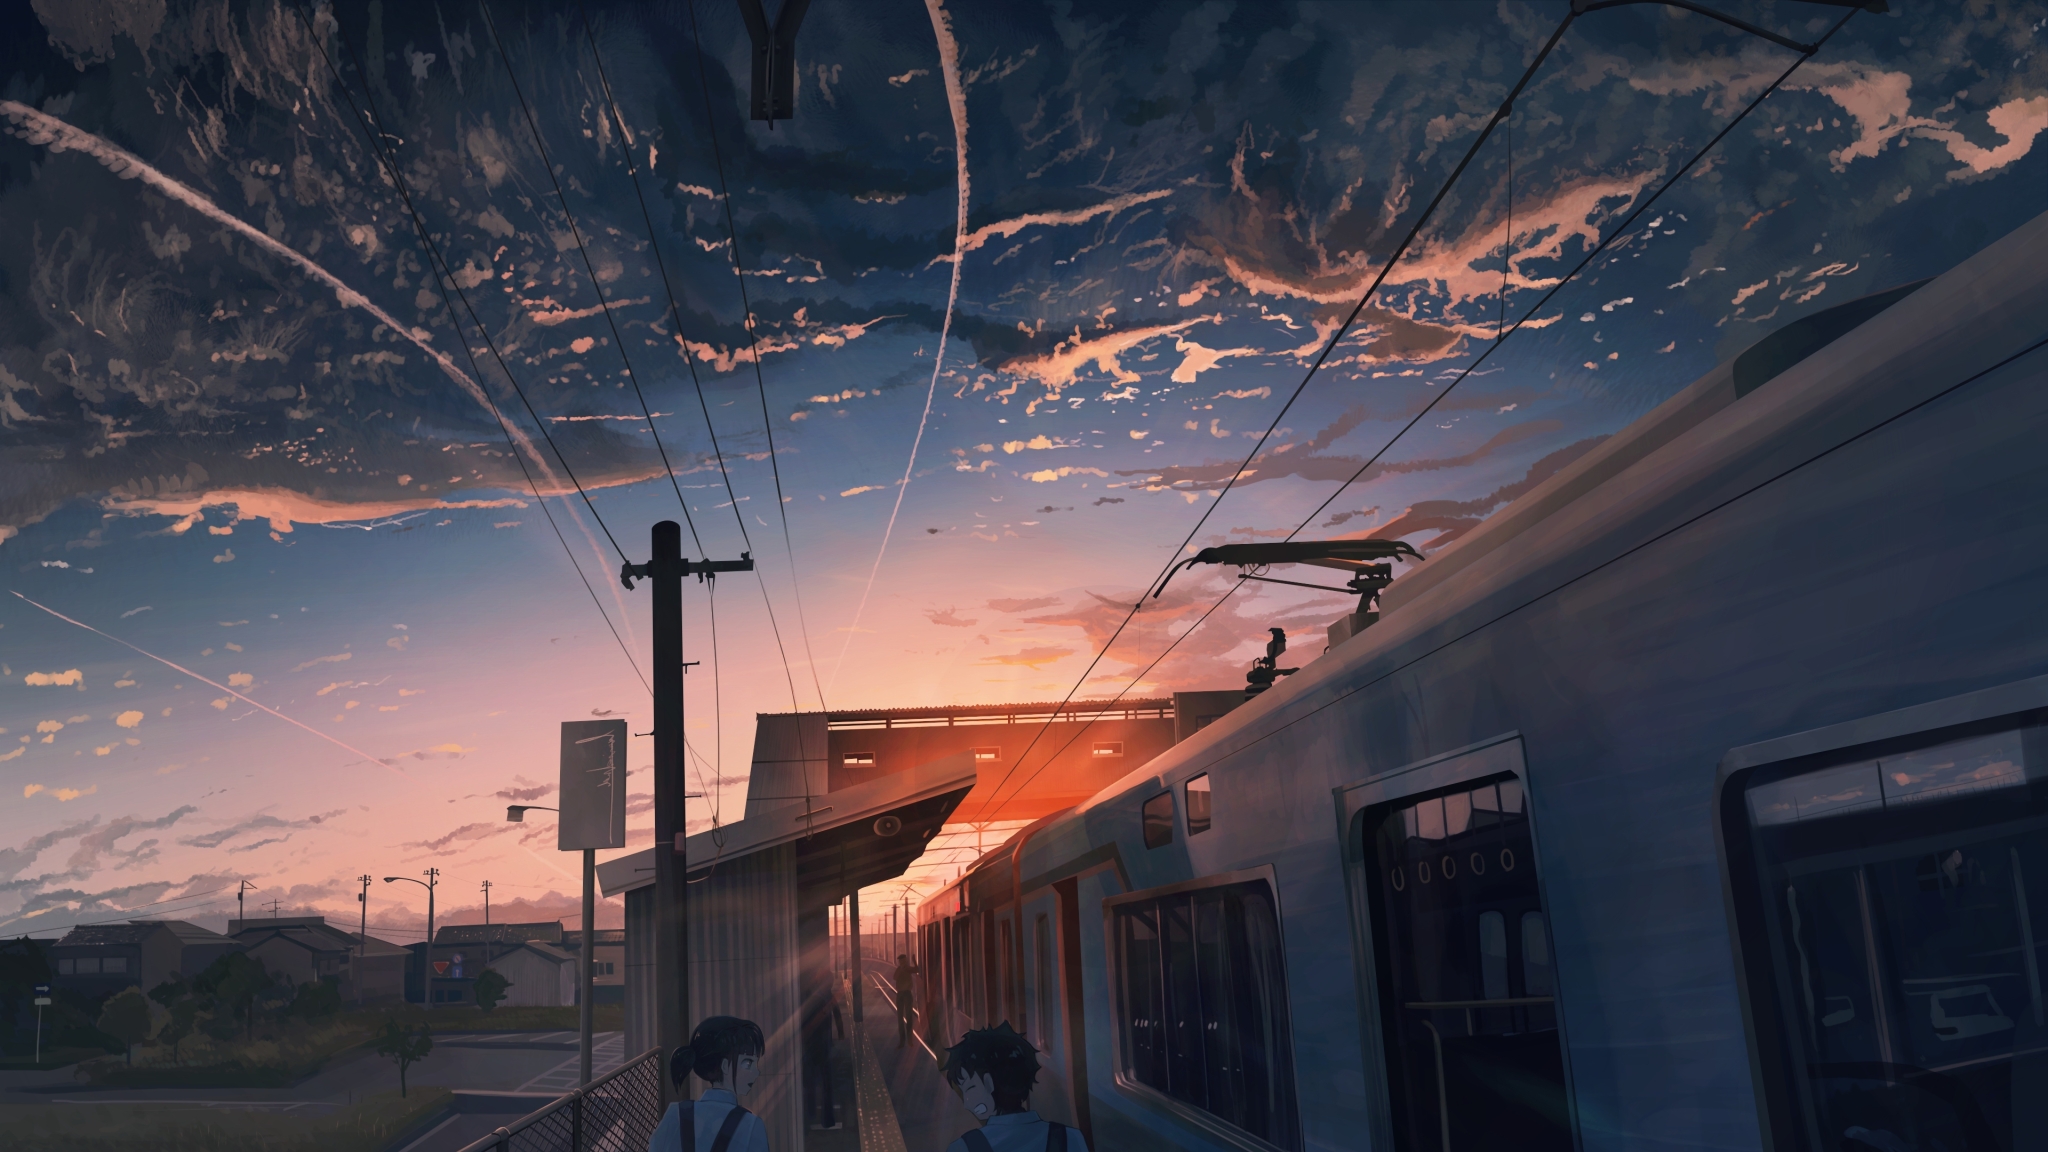 Wallpaper Anime Landscape, Fence, Sunset, Train, Scenic, Clouds ...